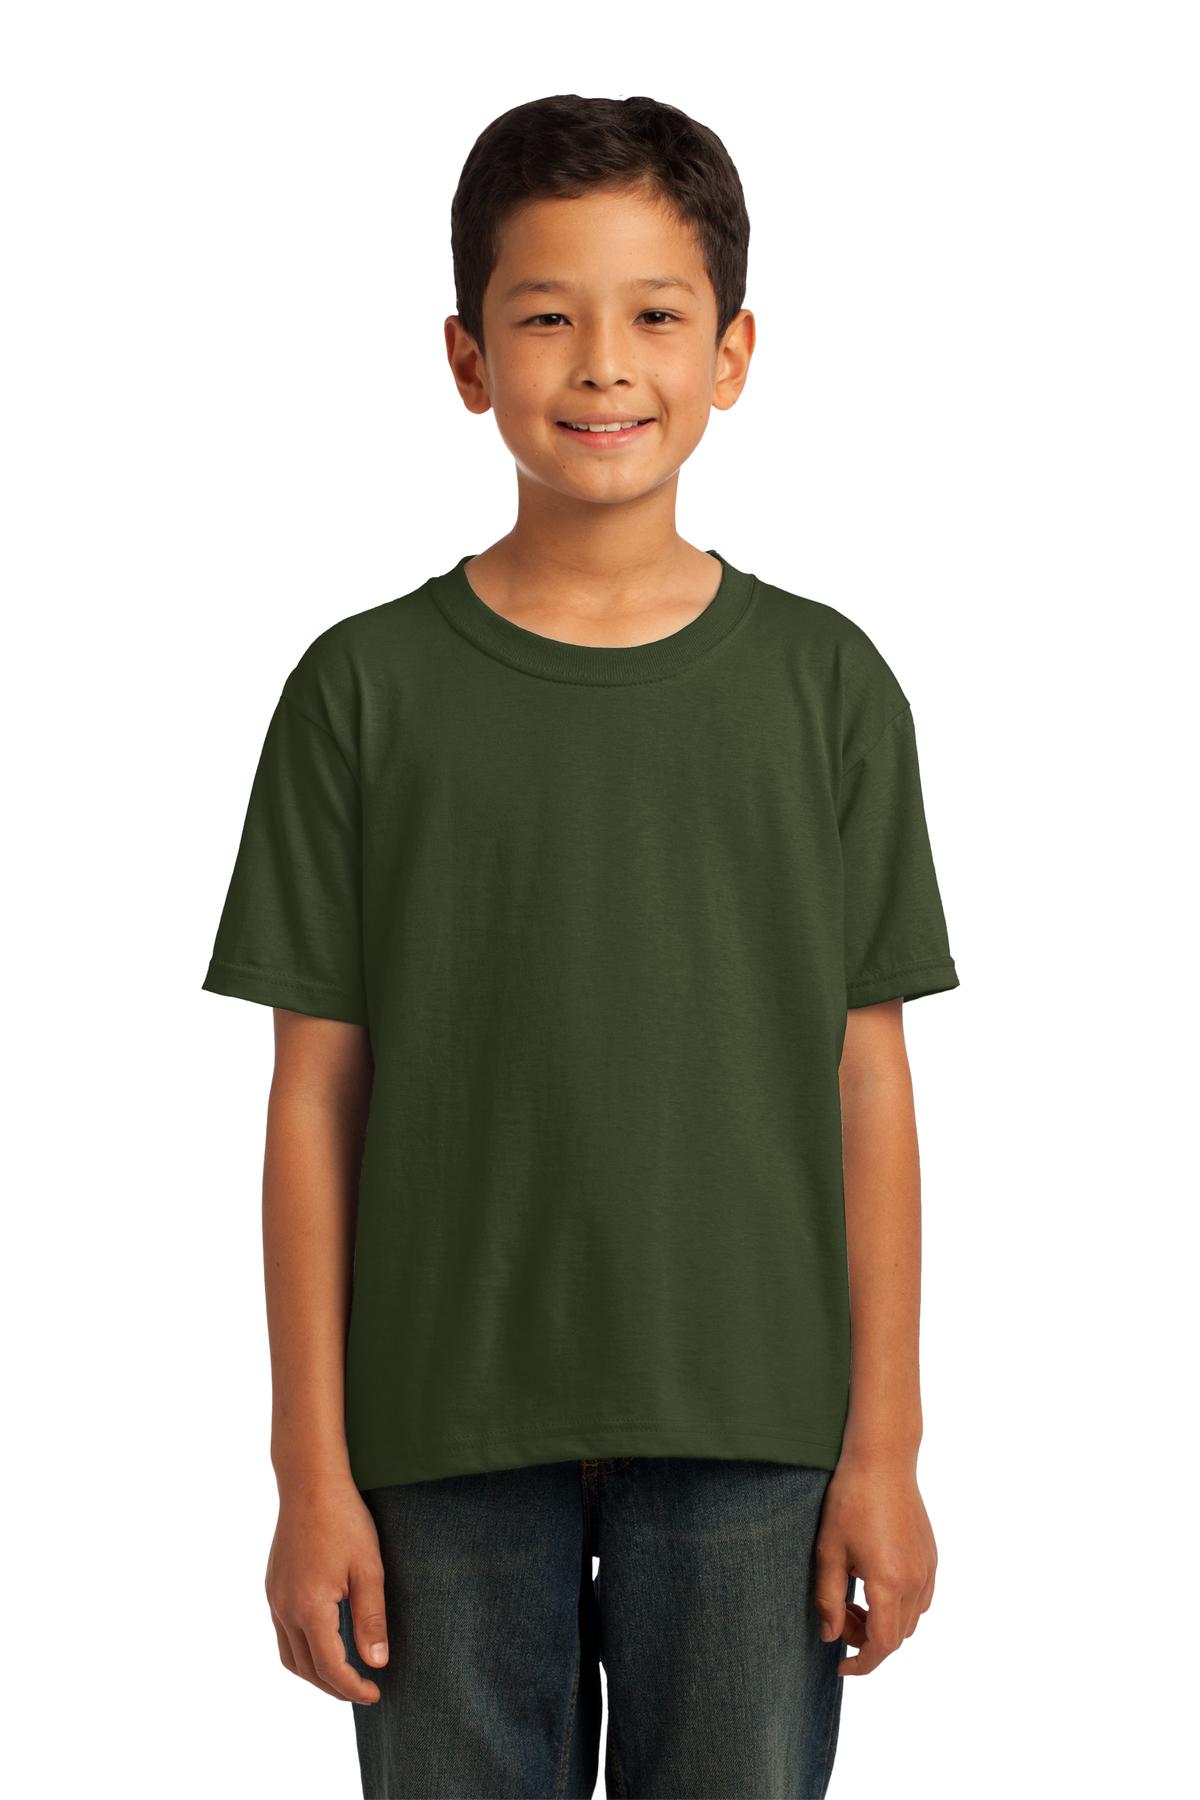 Fruit of the Loom DISCONTINUED Fruit of the Loom Youth HD Cotton 100% Cotton T-Shirt. 3930B